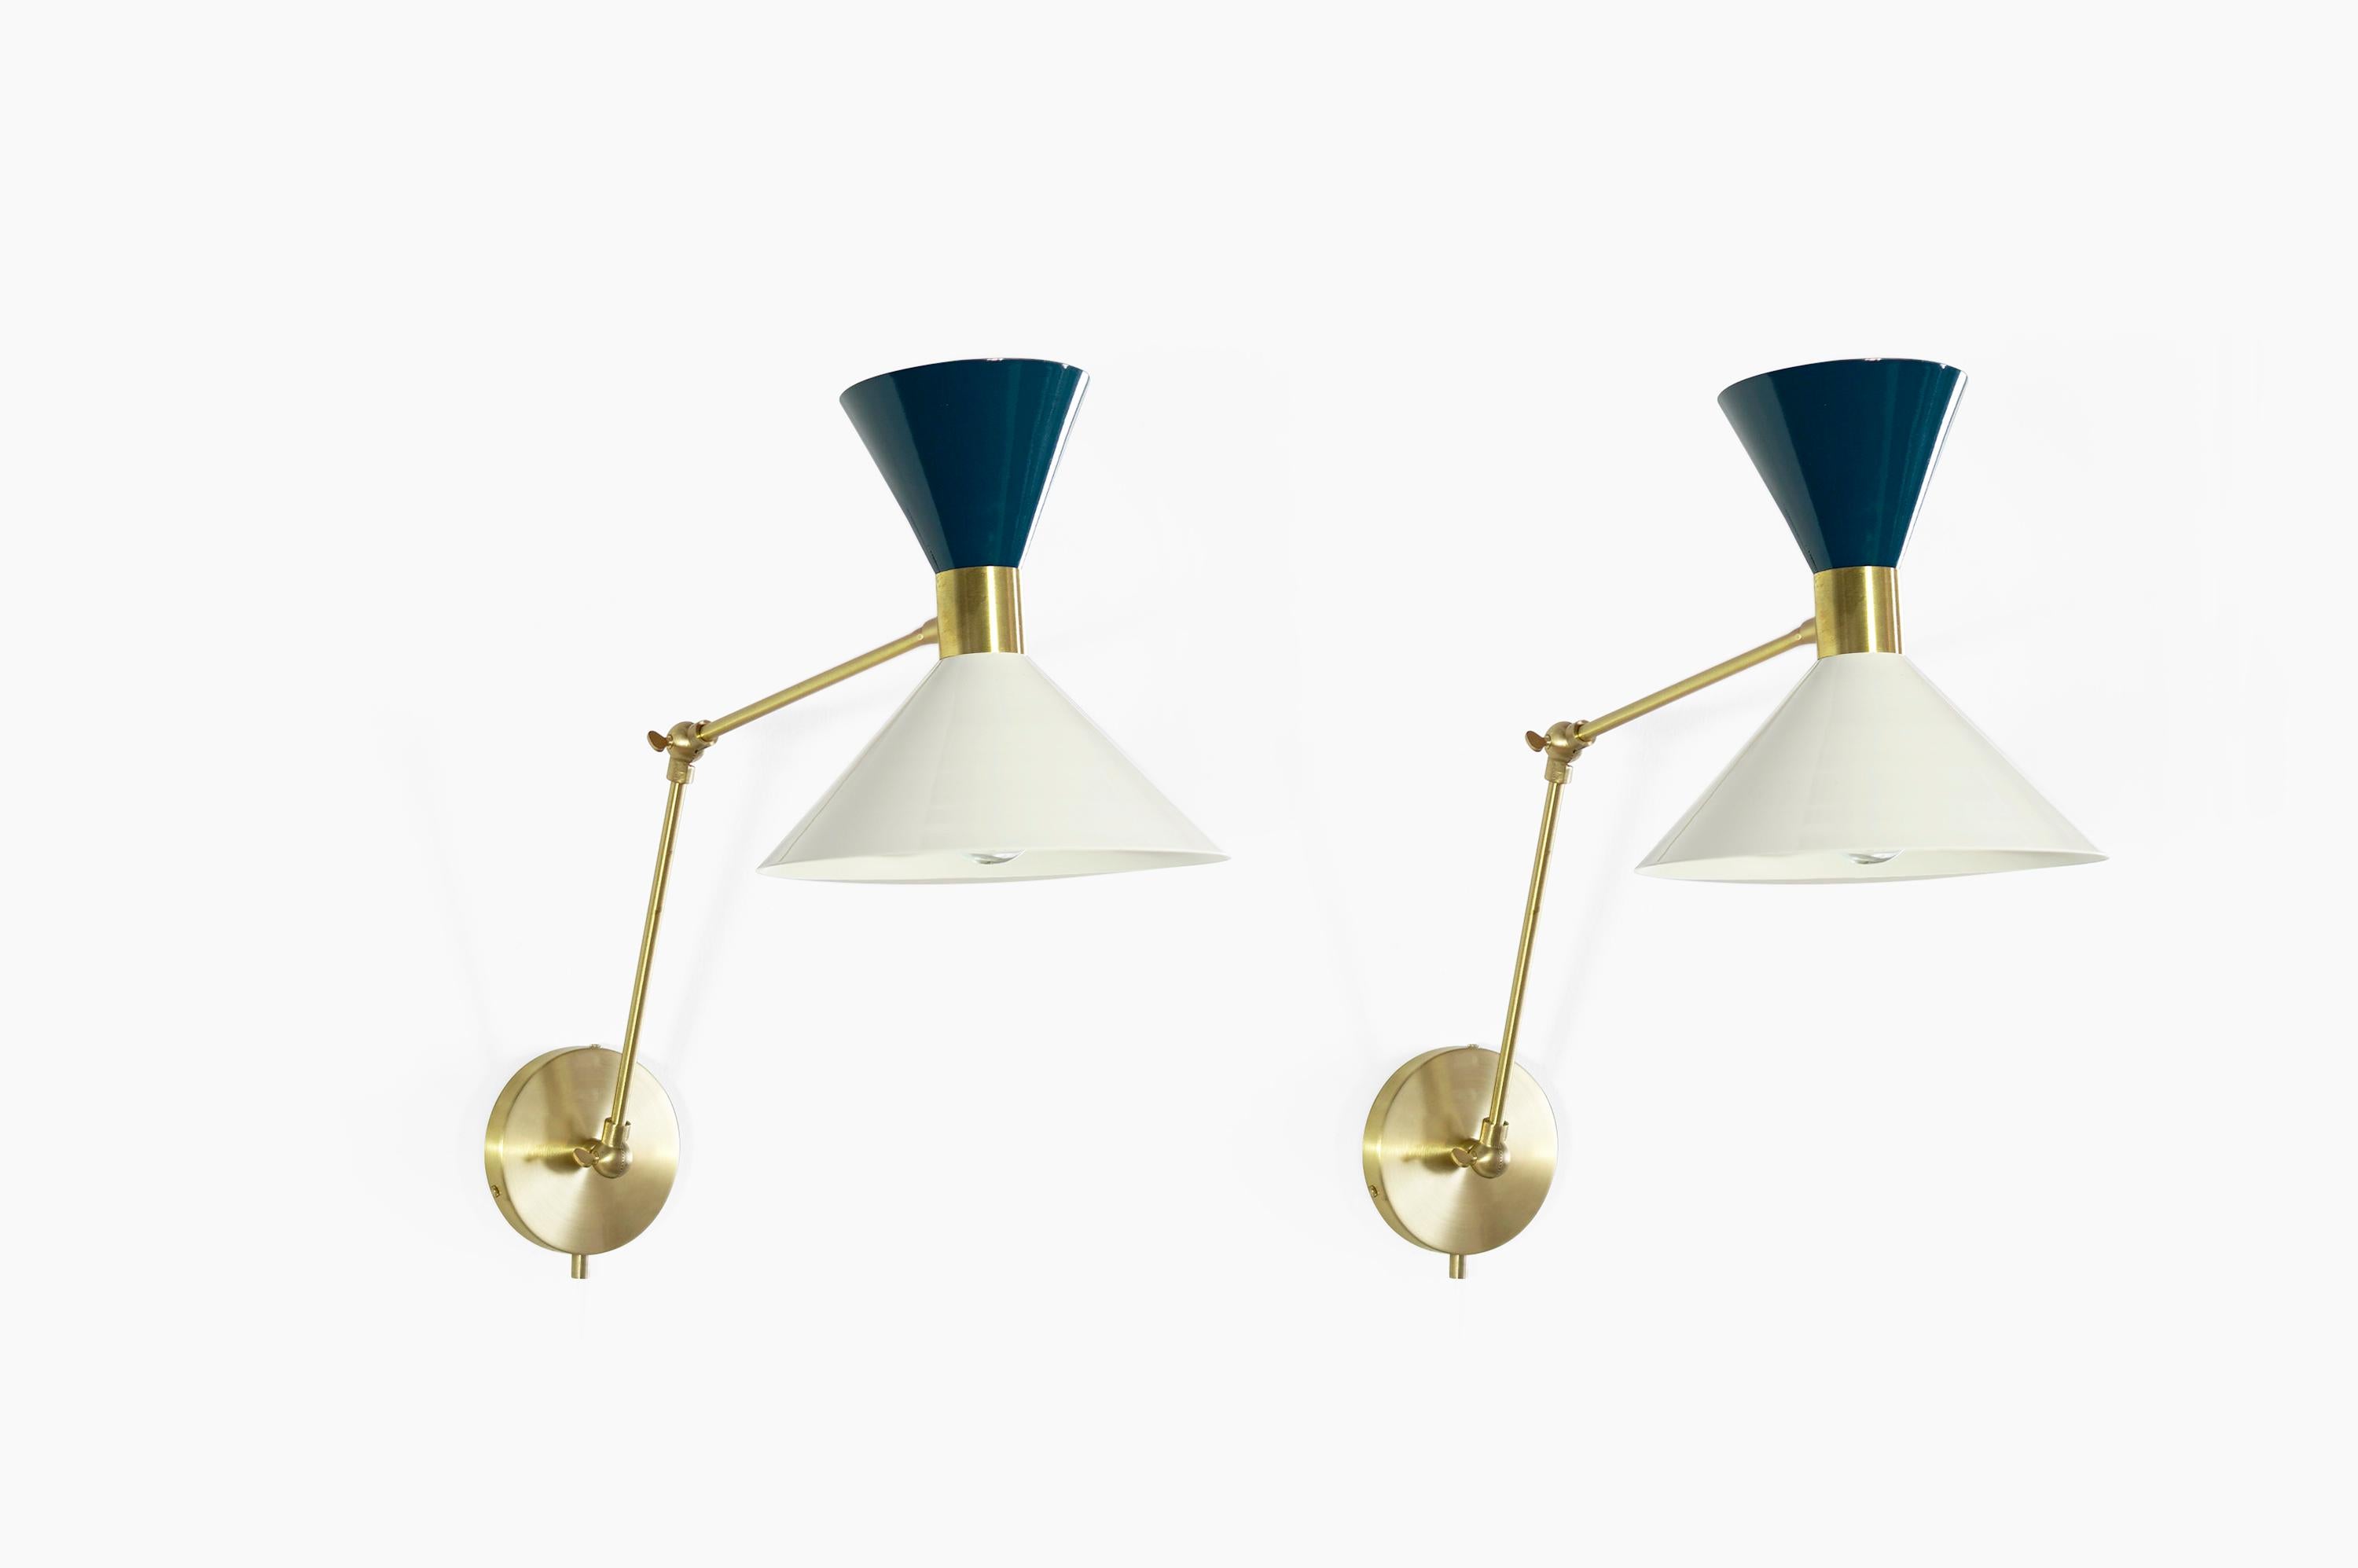 Monarch is a large scale wall-mount reading lamp or sconce with articulated arms. The wide brass band and dramatically scaled flared cone makes the Monarch a strong design statement. Swiveling head allows for cone adjustment. Arms articulate at both